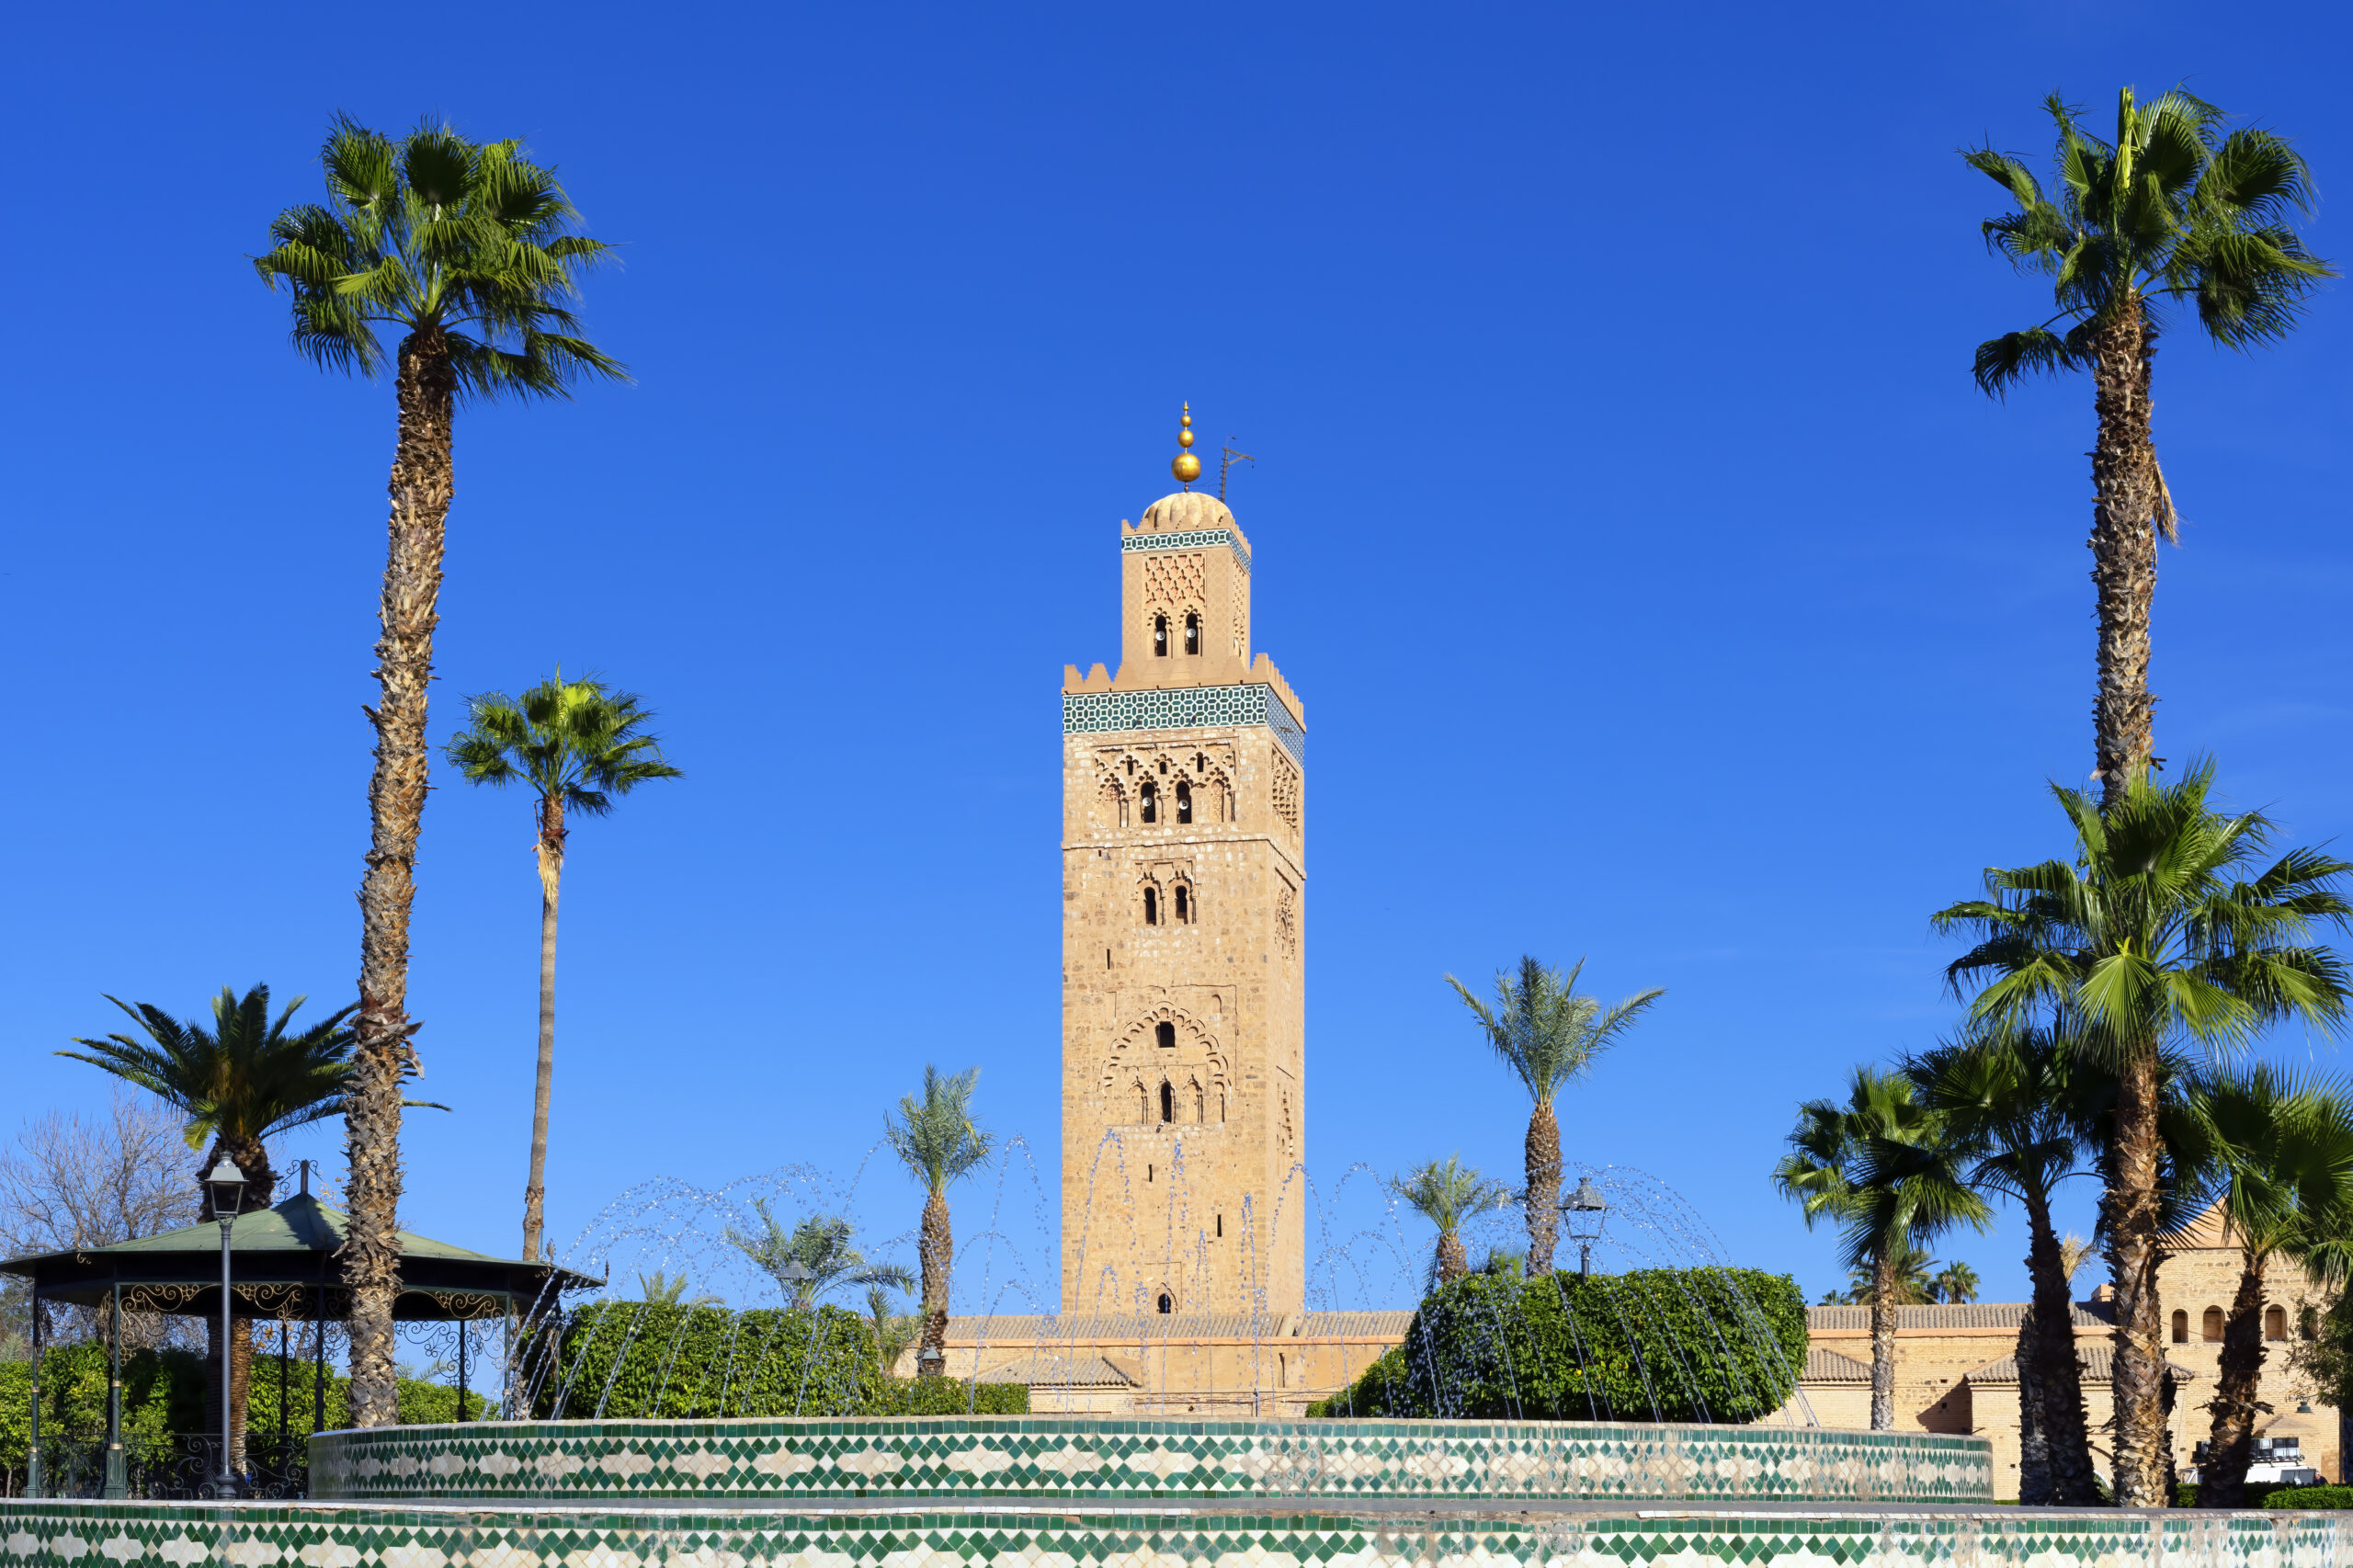 How many days in marrakech